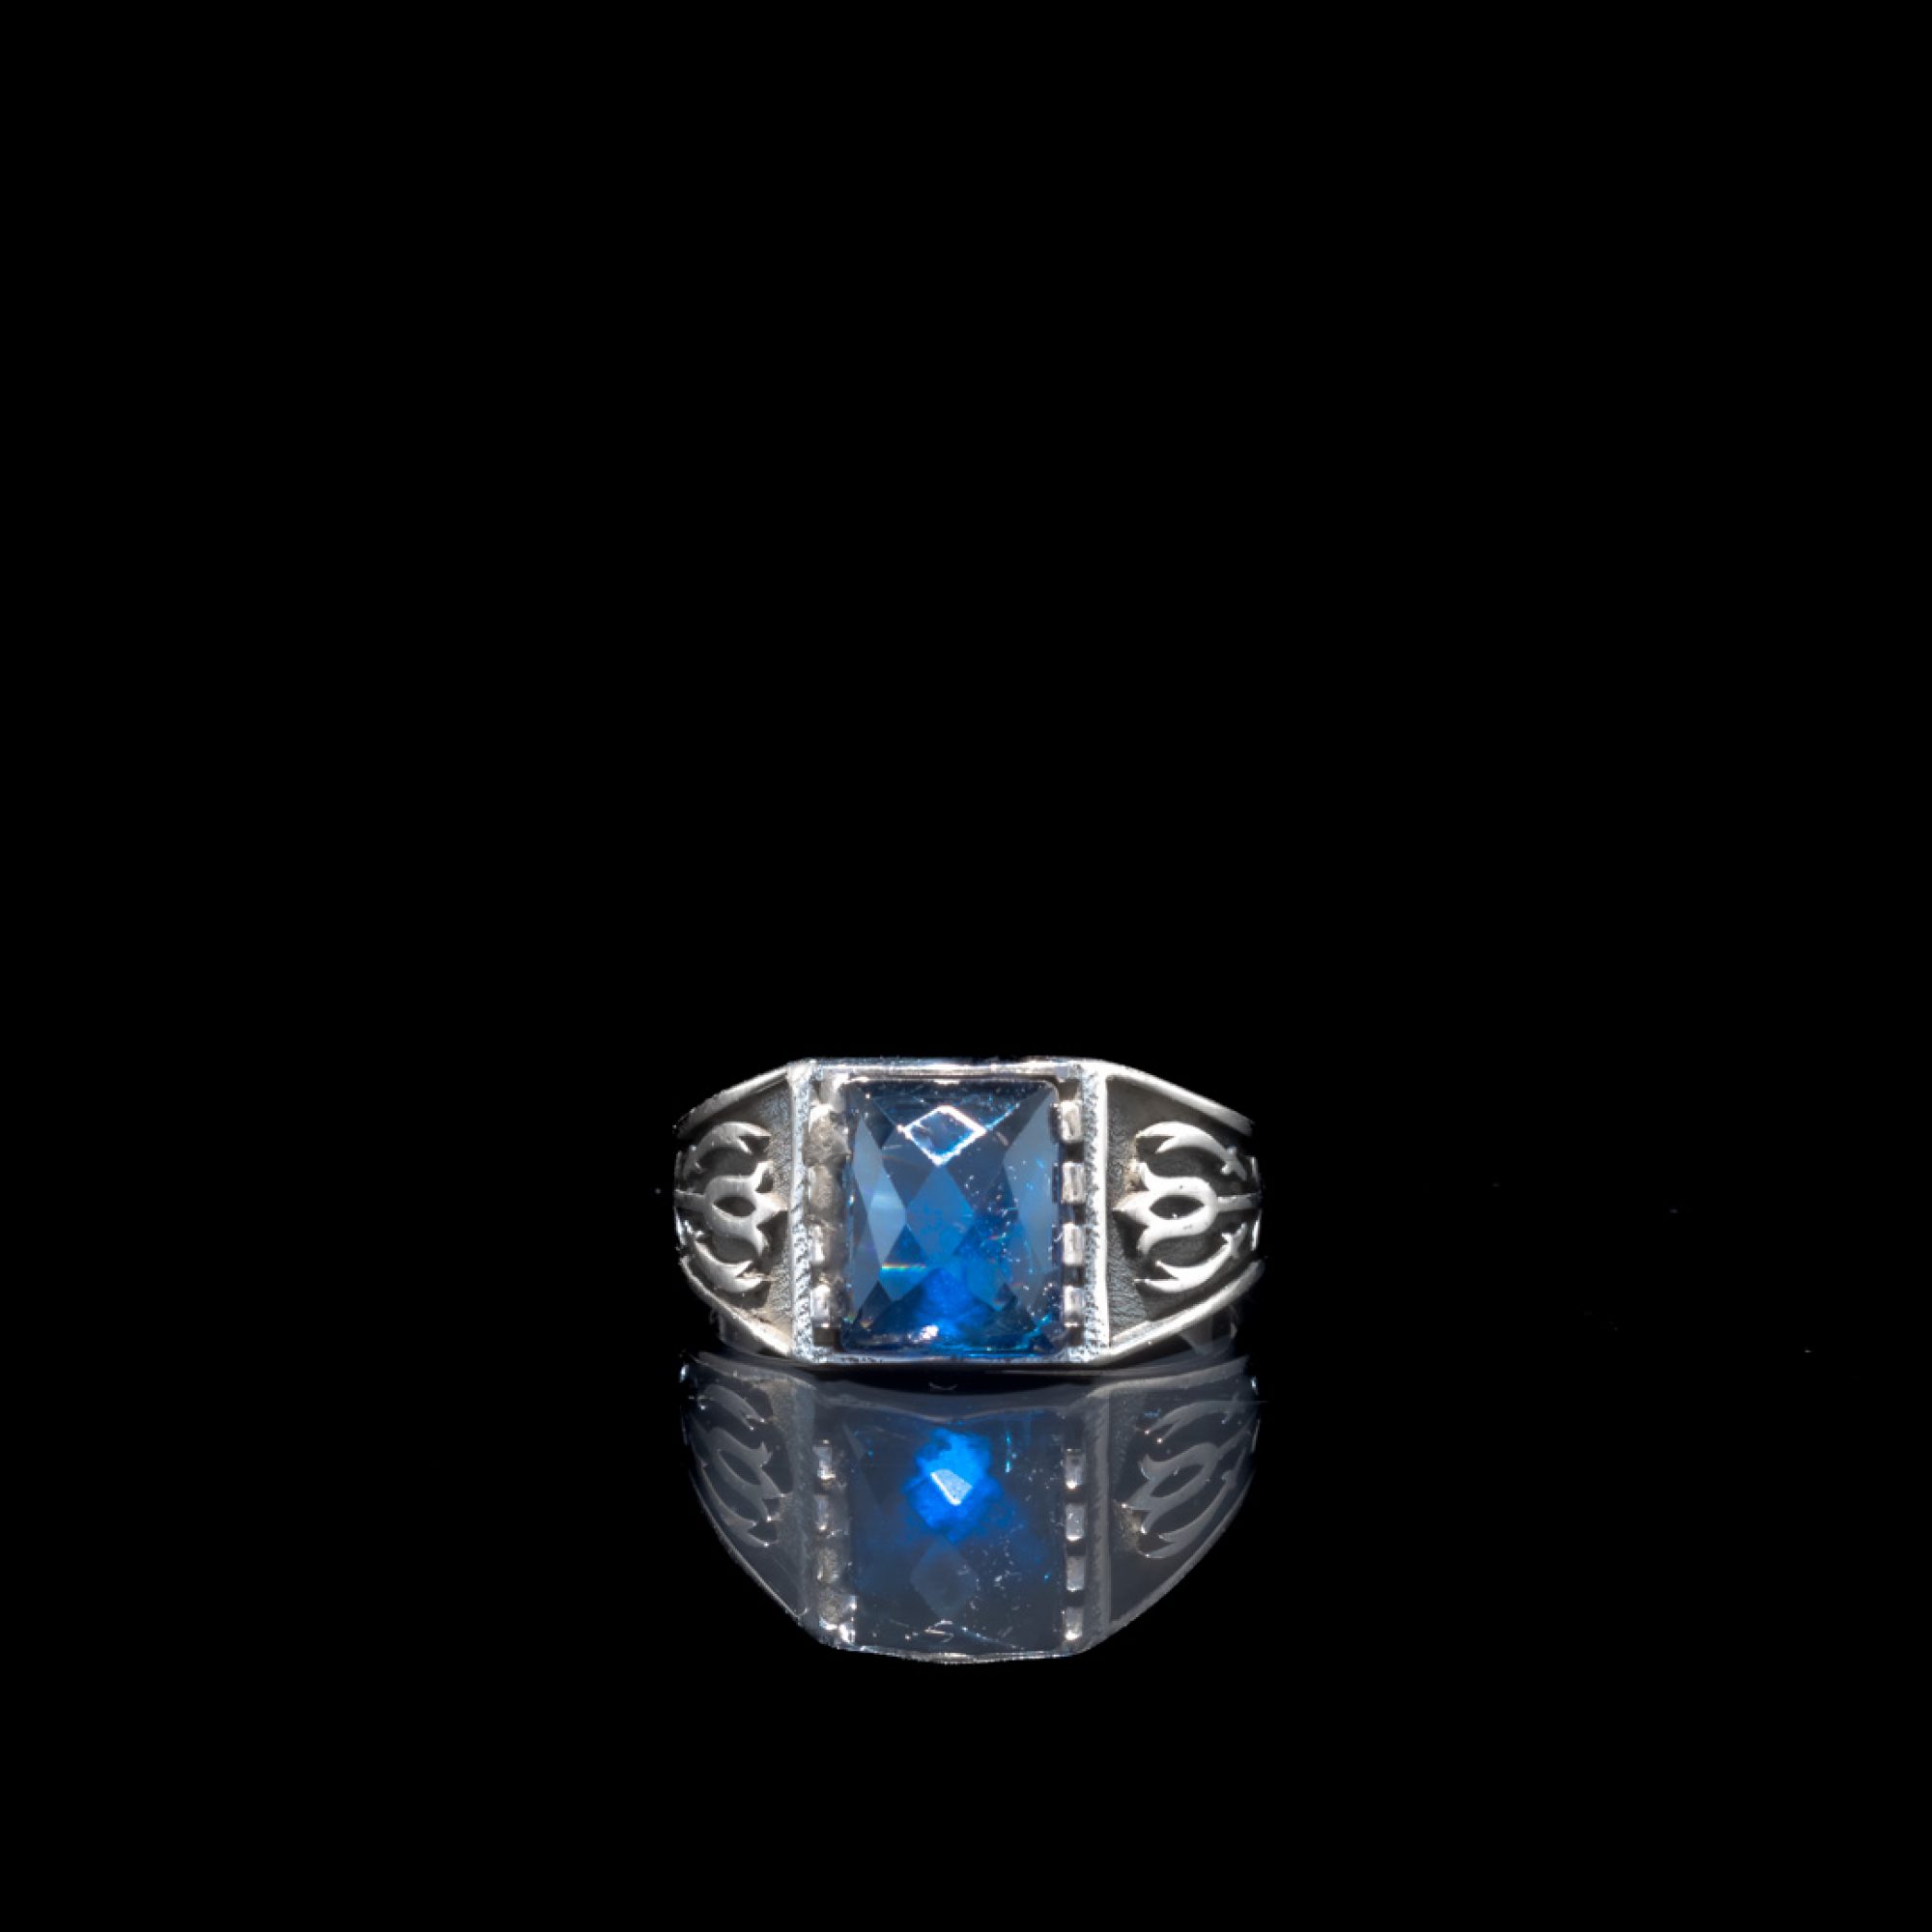 Silver ring with sapphire stone